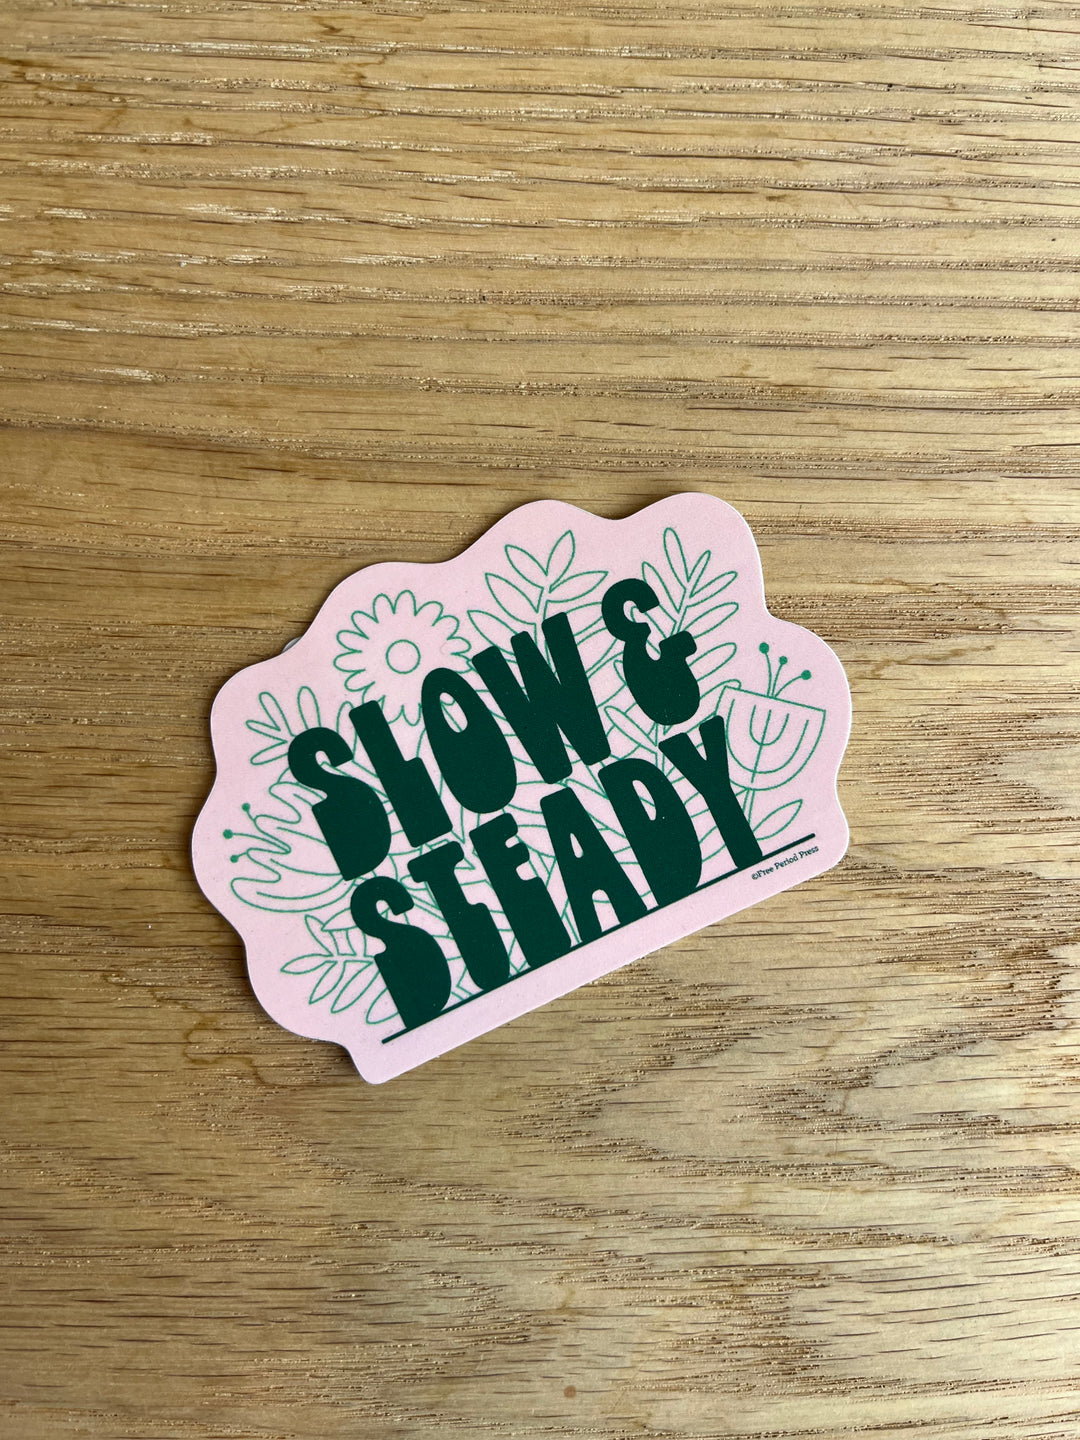 Slow and Steady (New) Vinyl Decal Sticker